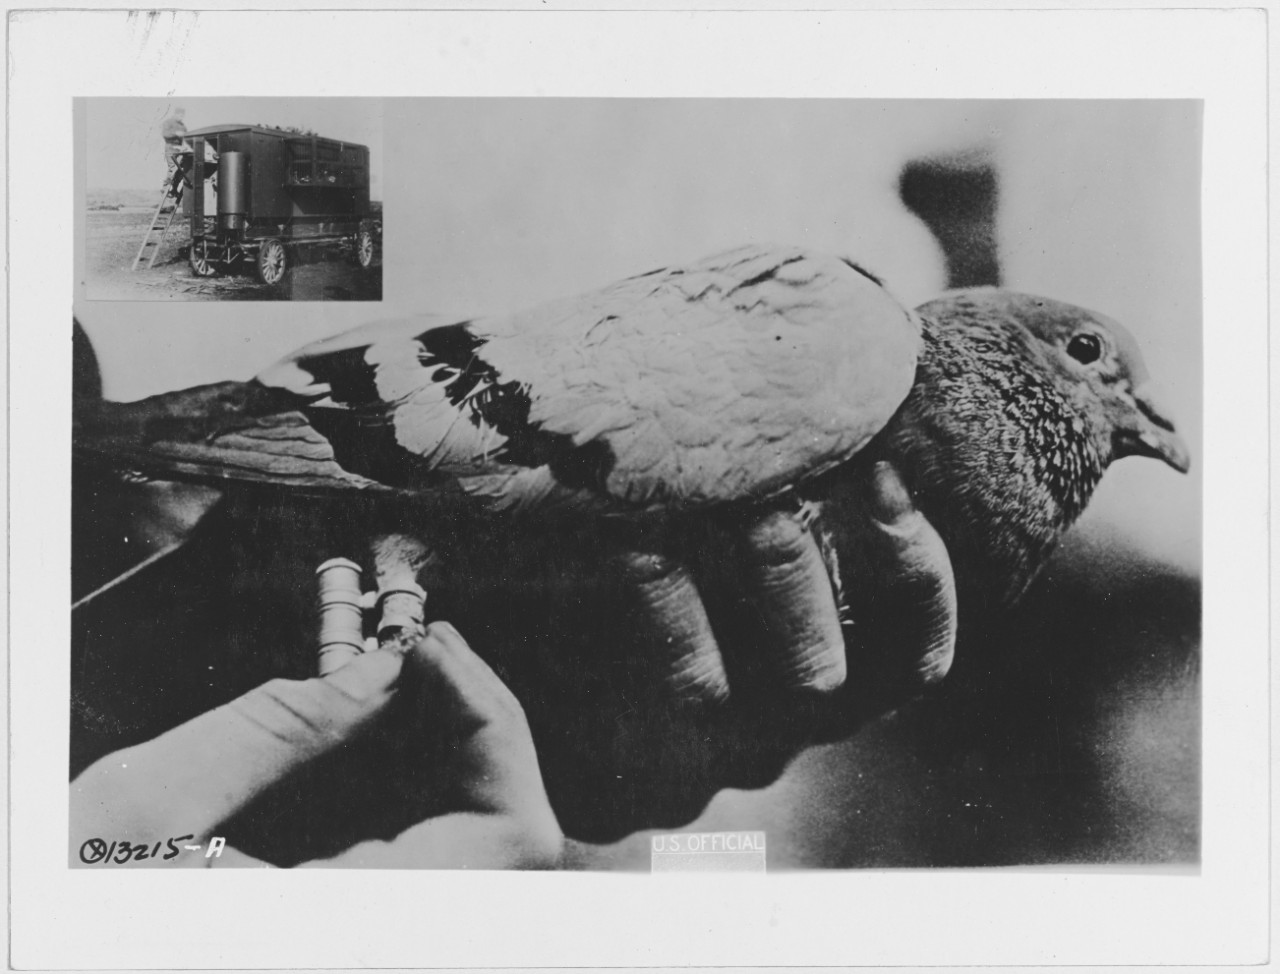 Clasping message to Carrier Pigeon, inset image of man with Pigeon vehicle. U.S. Naval Air Station, Brest, France. 1917-1919.